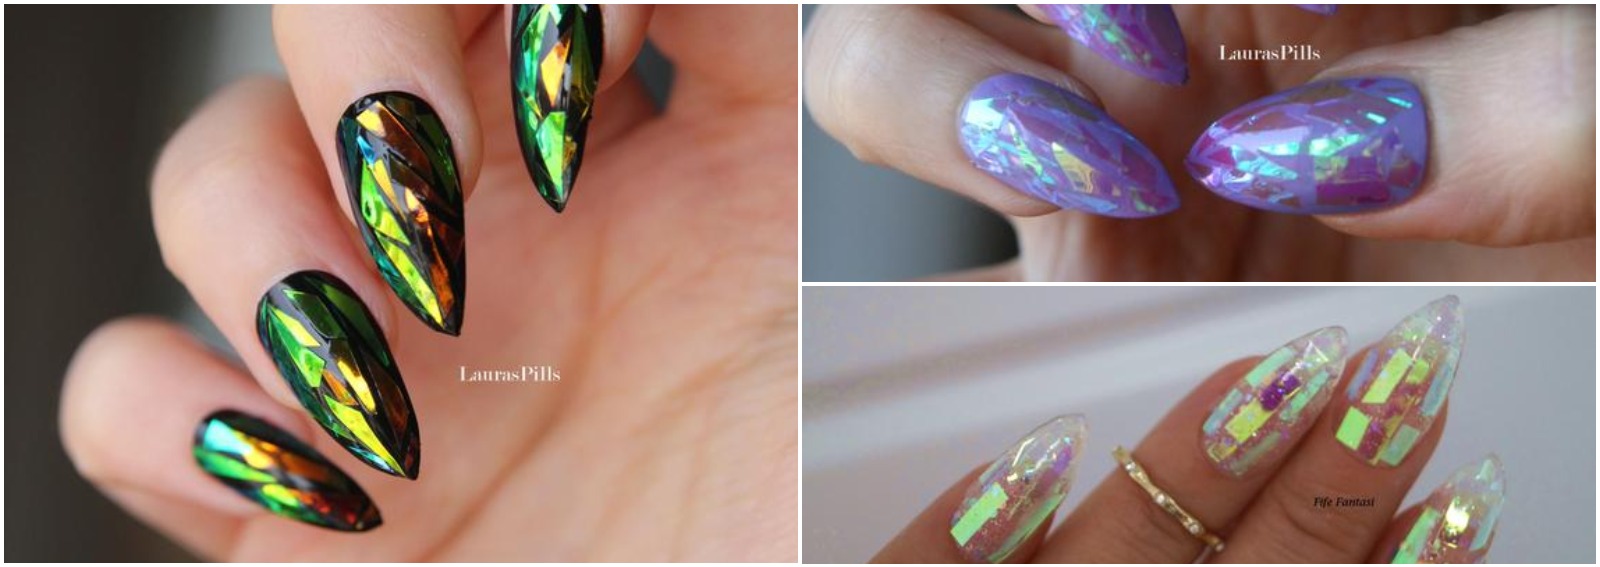 shattered glass nails nail art unghie effetto vetro rotto manicure cover desktop